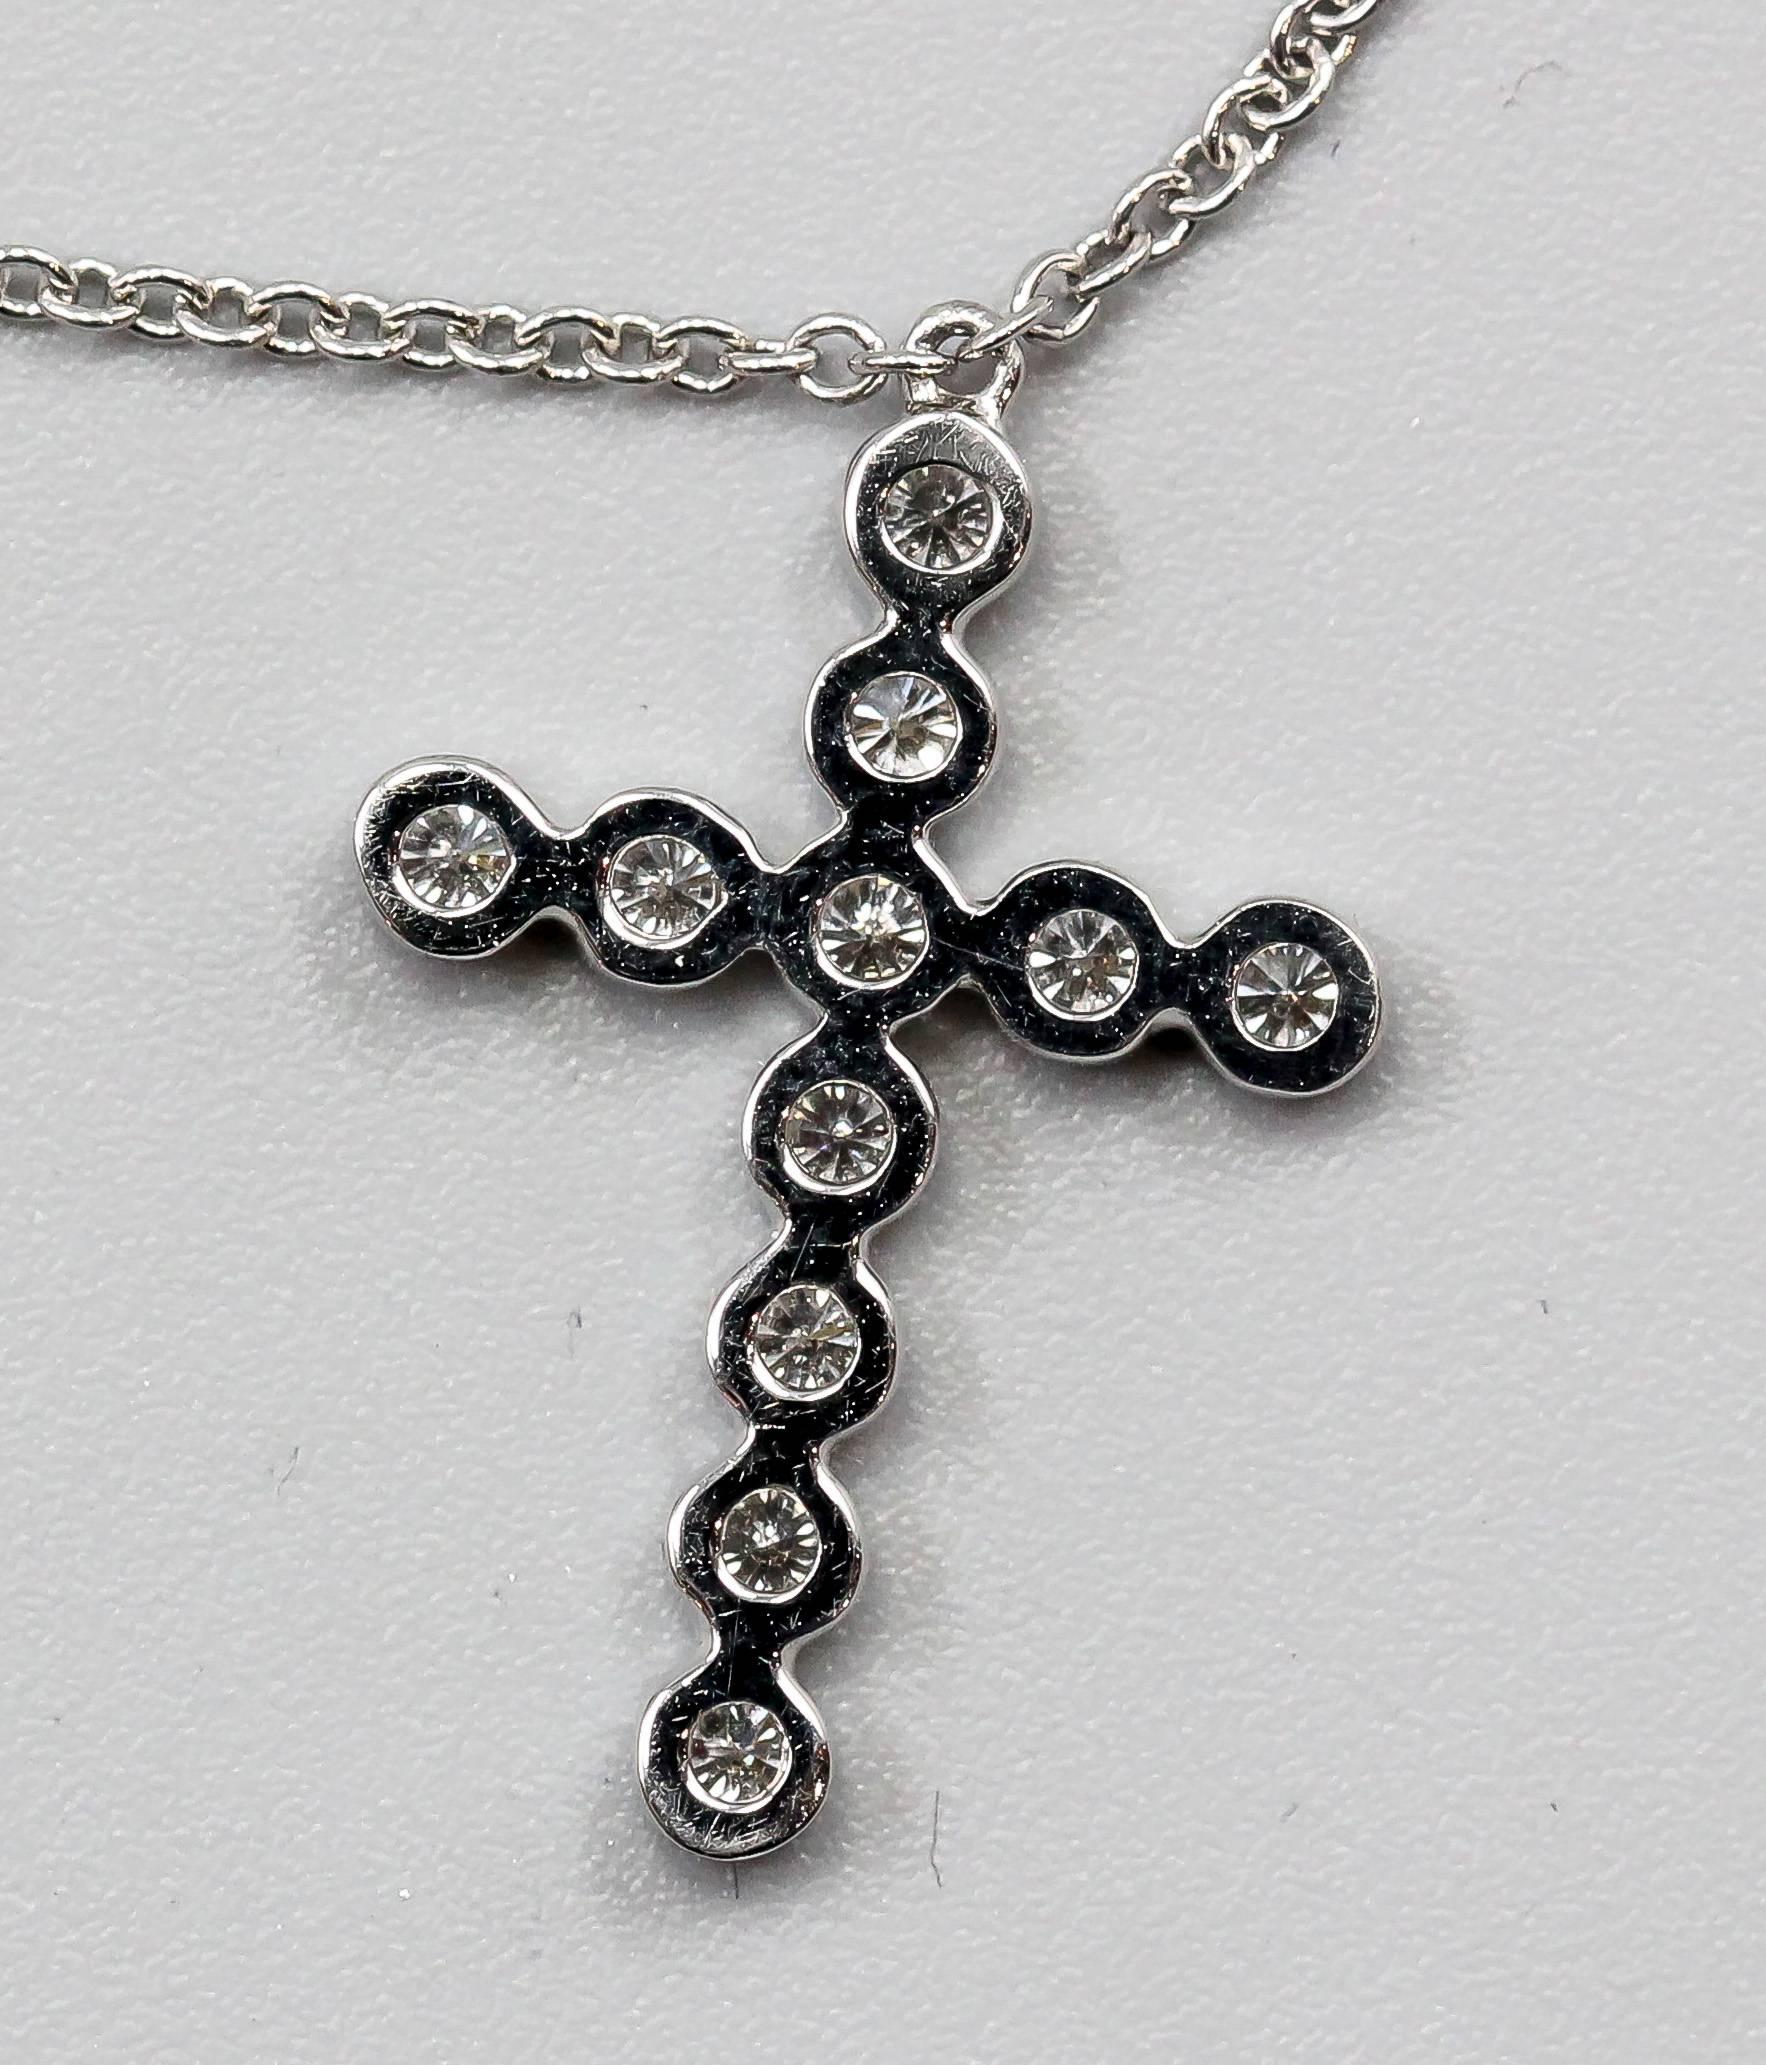 Elegant diamond and platinum cross pendant and chain by Tiffany & Co. Cross features high grade round brilliant cut diamonds. Chain is approx. 16